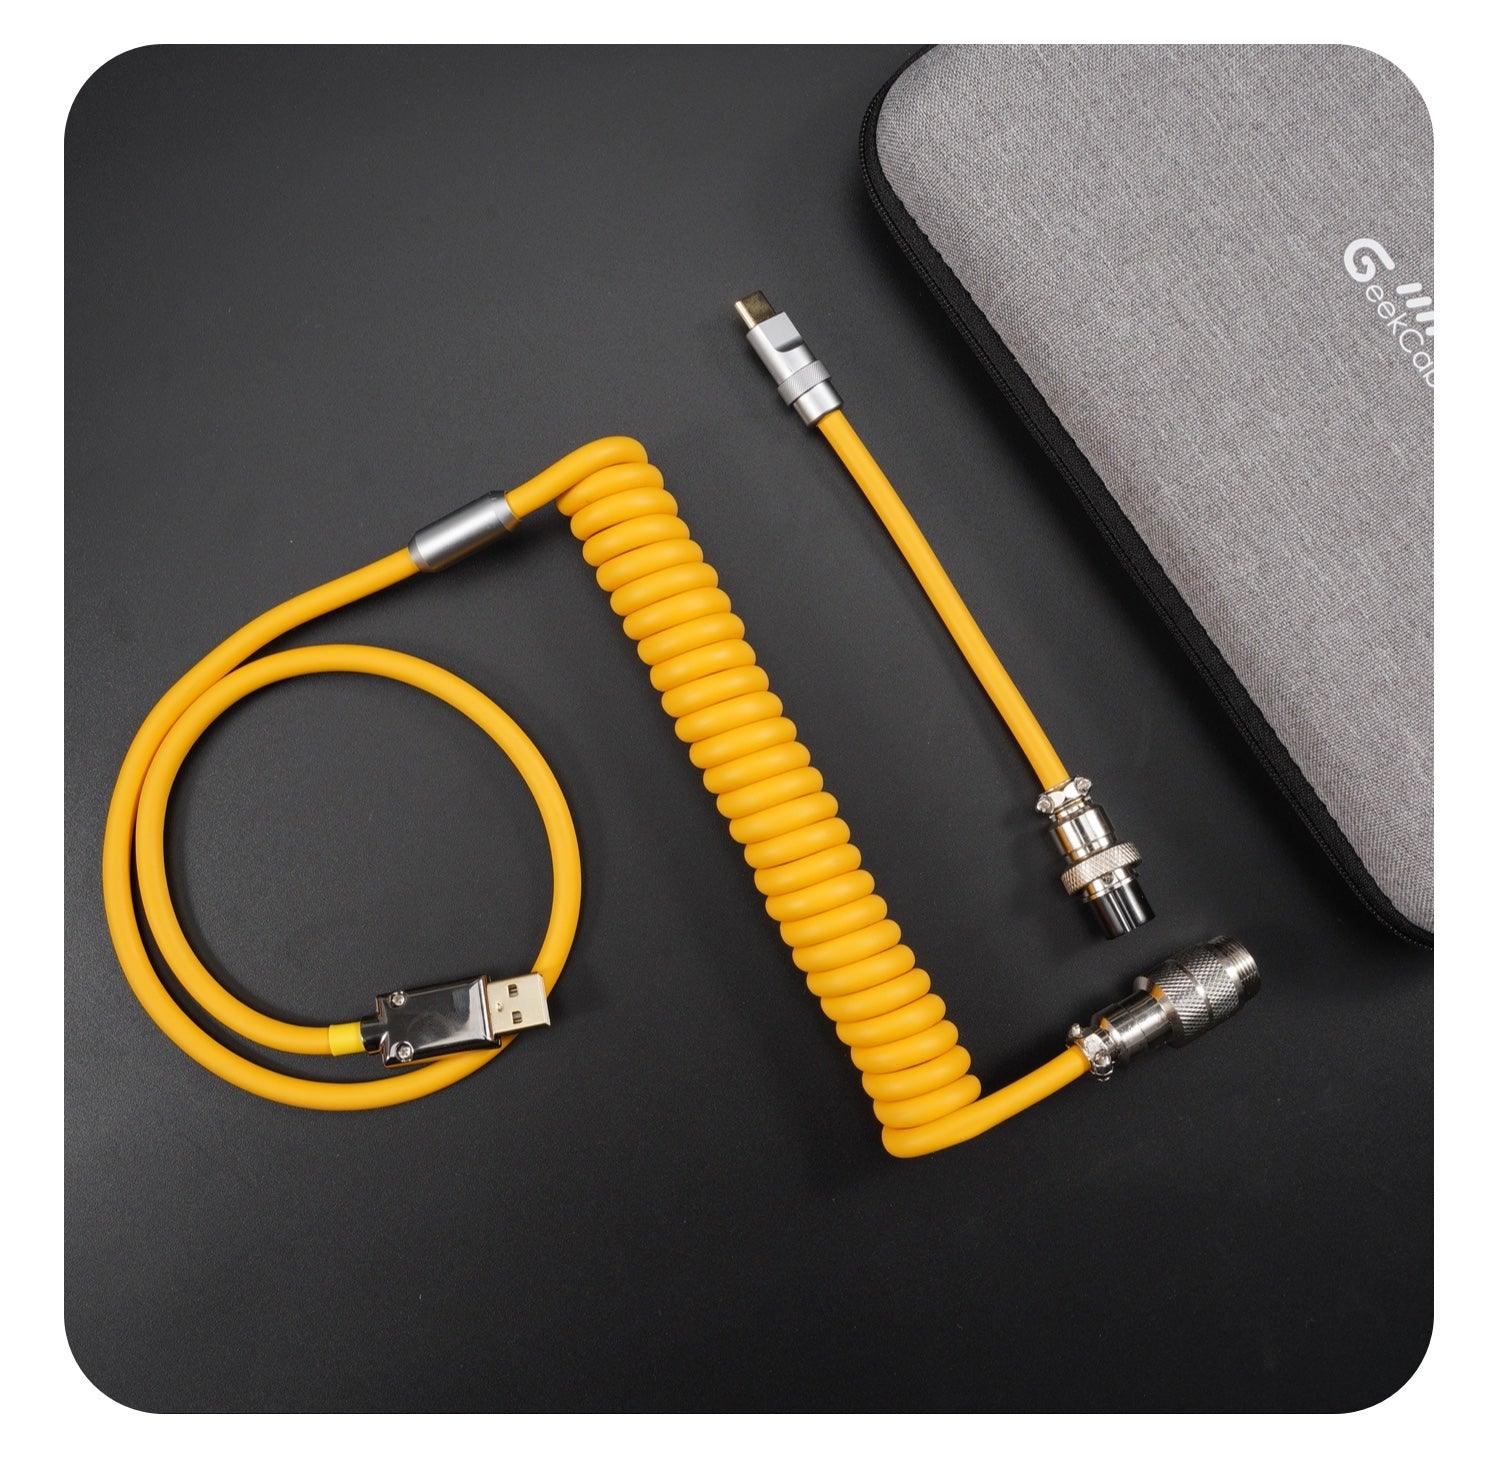 Geekcable Multiple Color Customized DIY Mechanical Keyboard Cable - IPOPULARSHOP